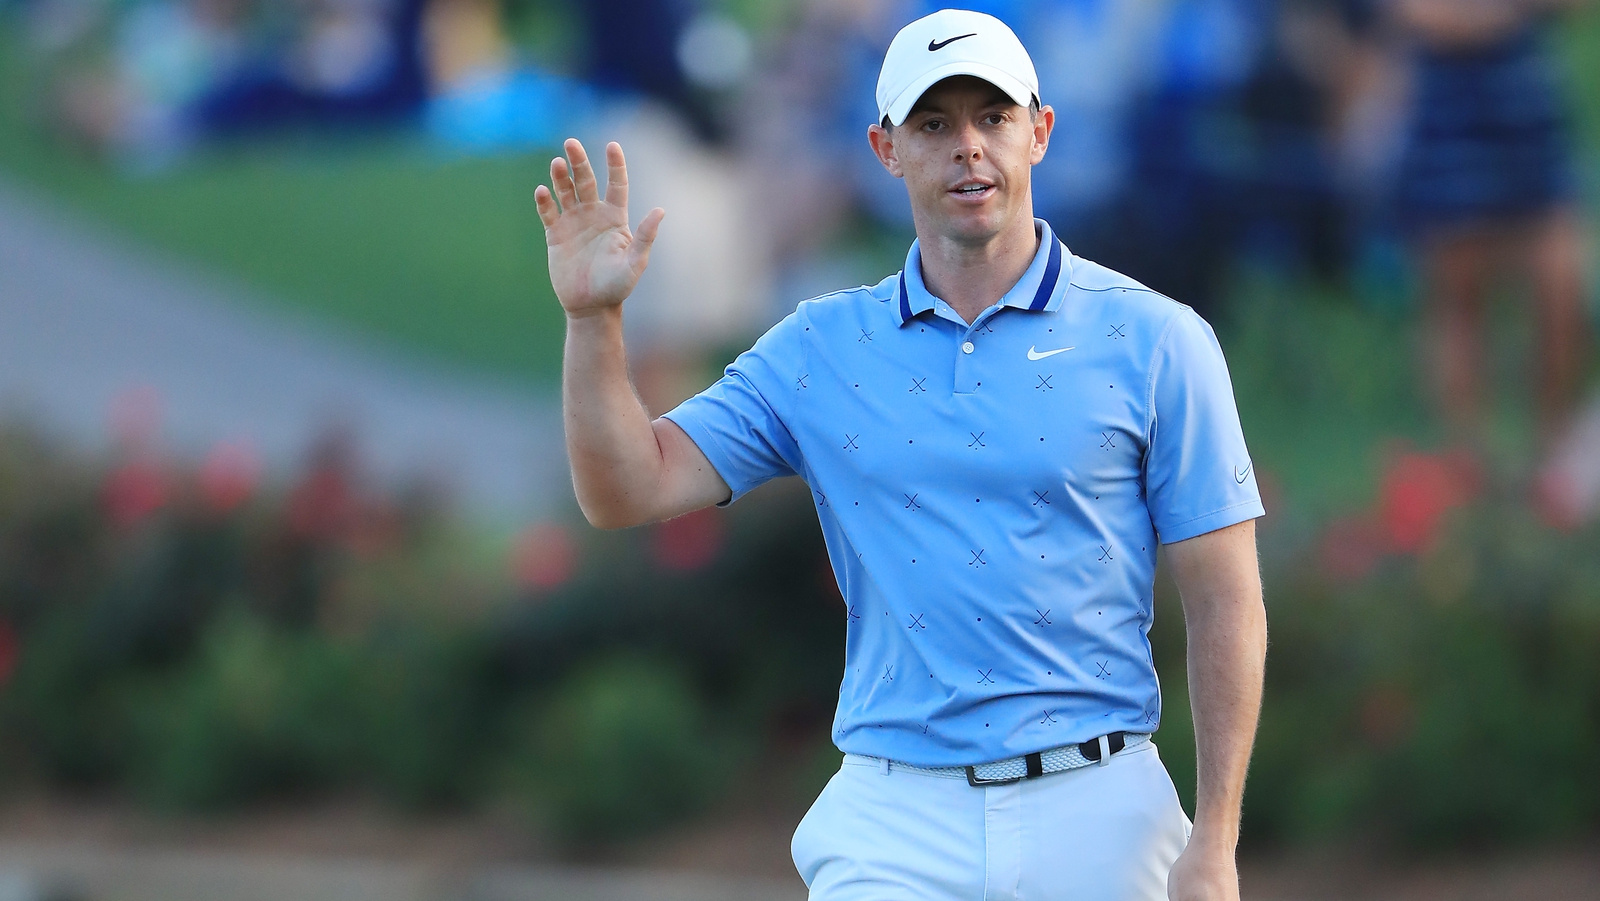 'I felt great' - McIlroy makes his move at the Players